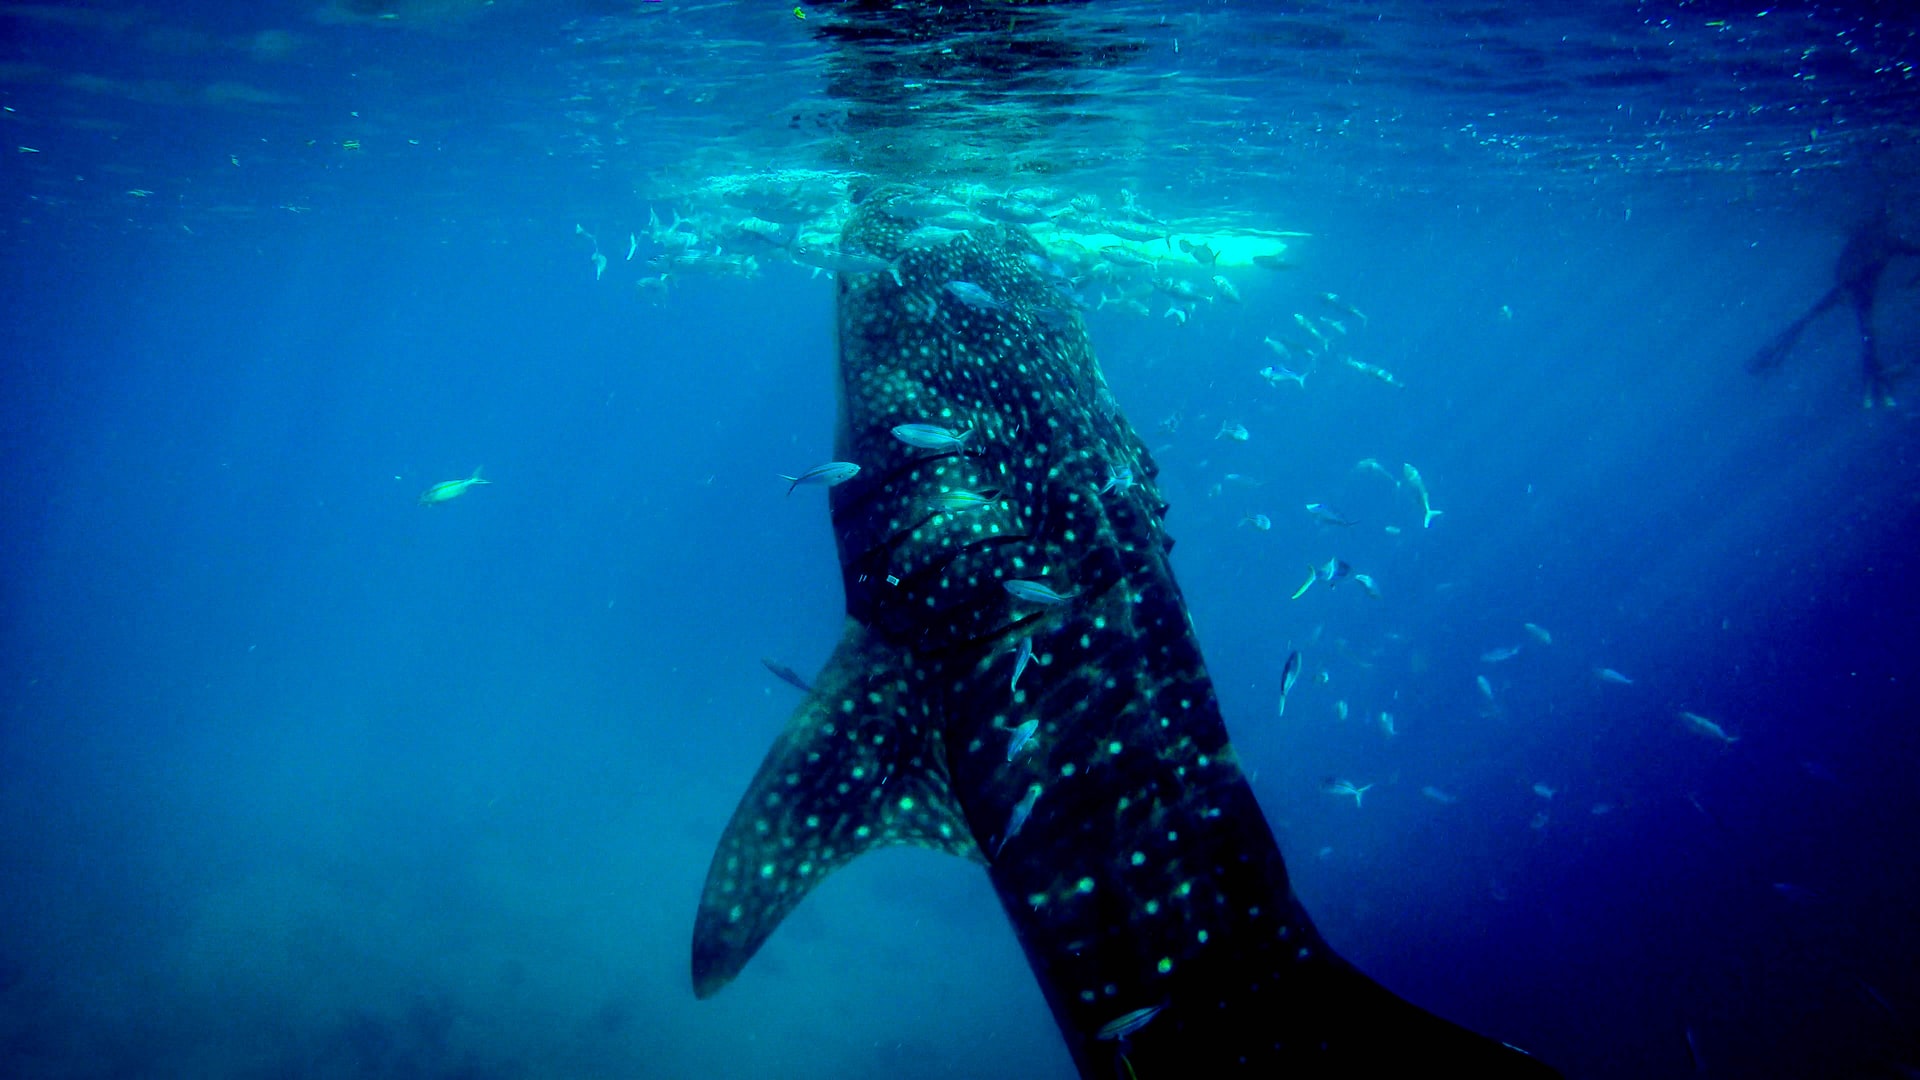 The whale shark is listed as endangered on the International Union for Conservation of Nature's (IUCN) Red List. It is still hunted in some areas and its fins can be valuable in the shark finning trade. Since they are slow to grow and reproduce, populations may not recover quickly if this species is overfished.